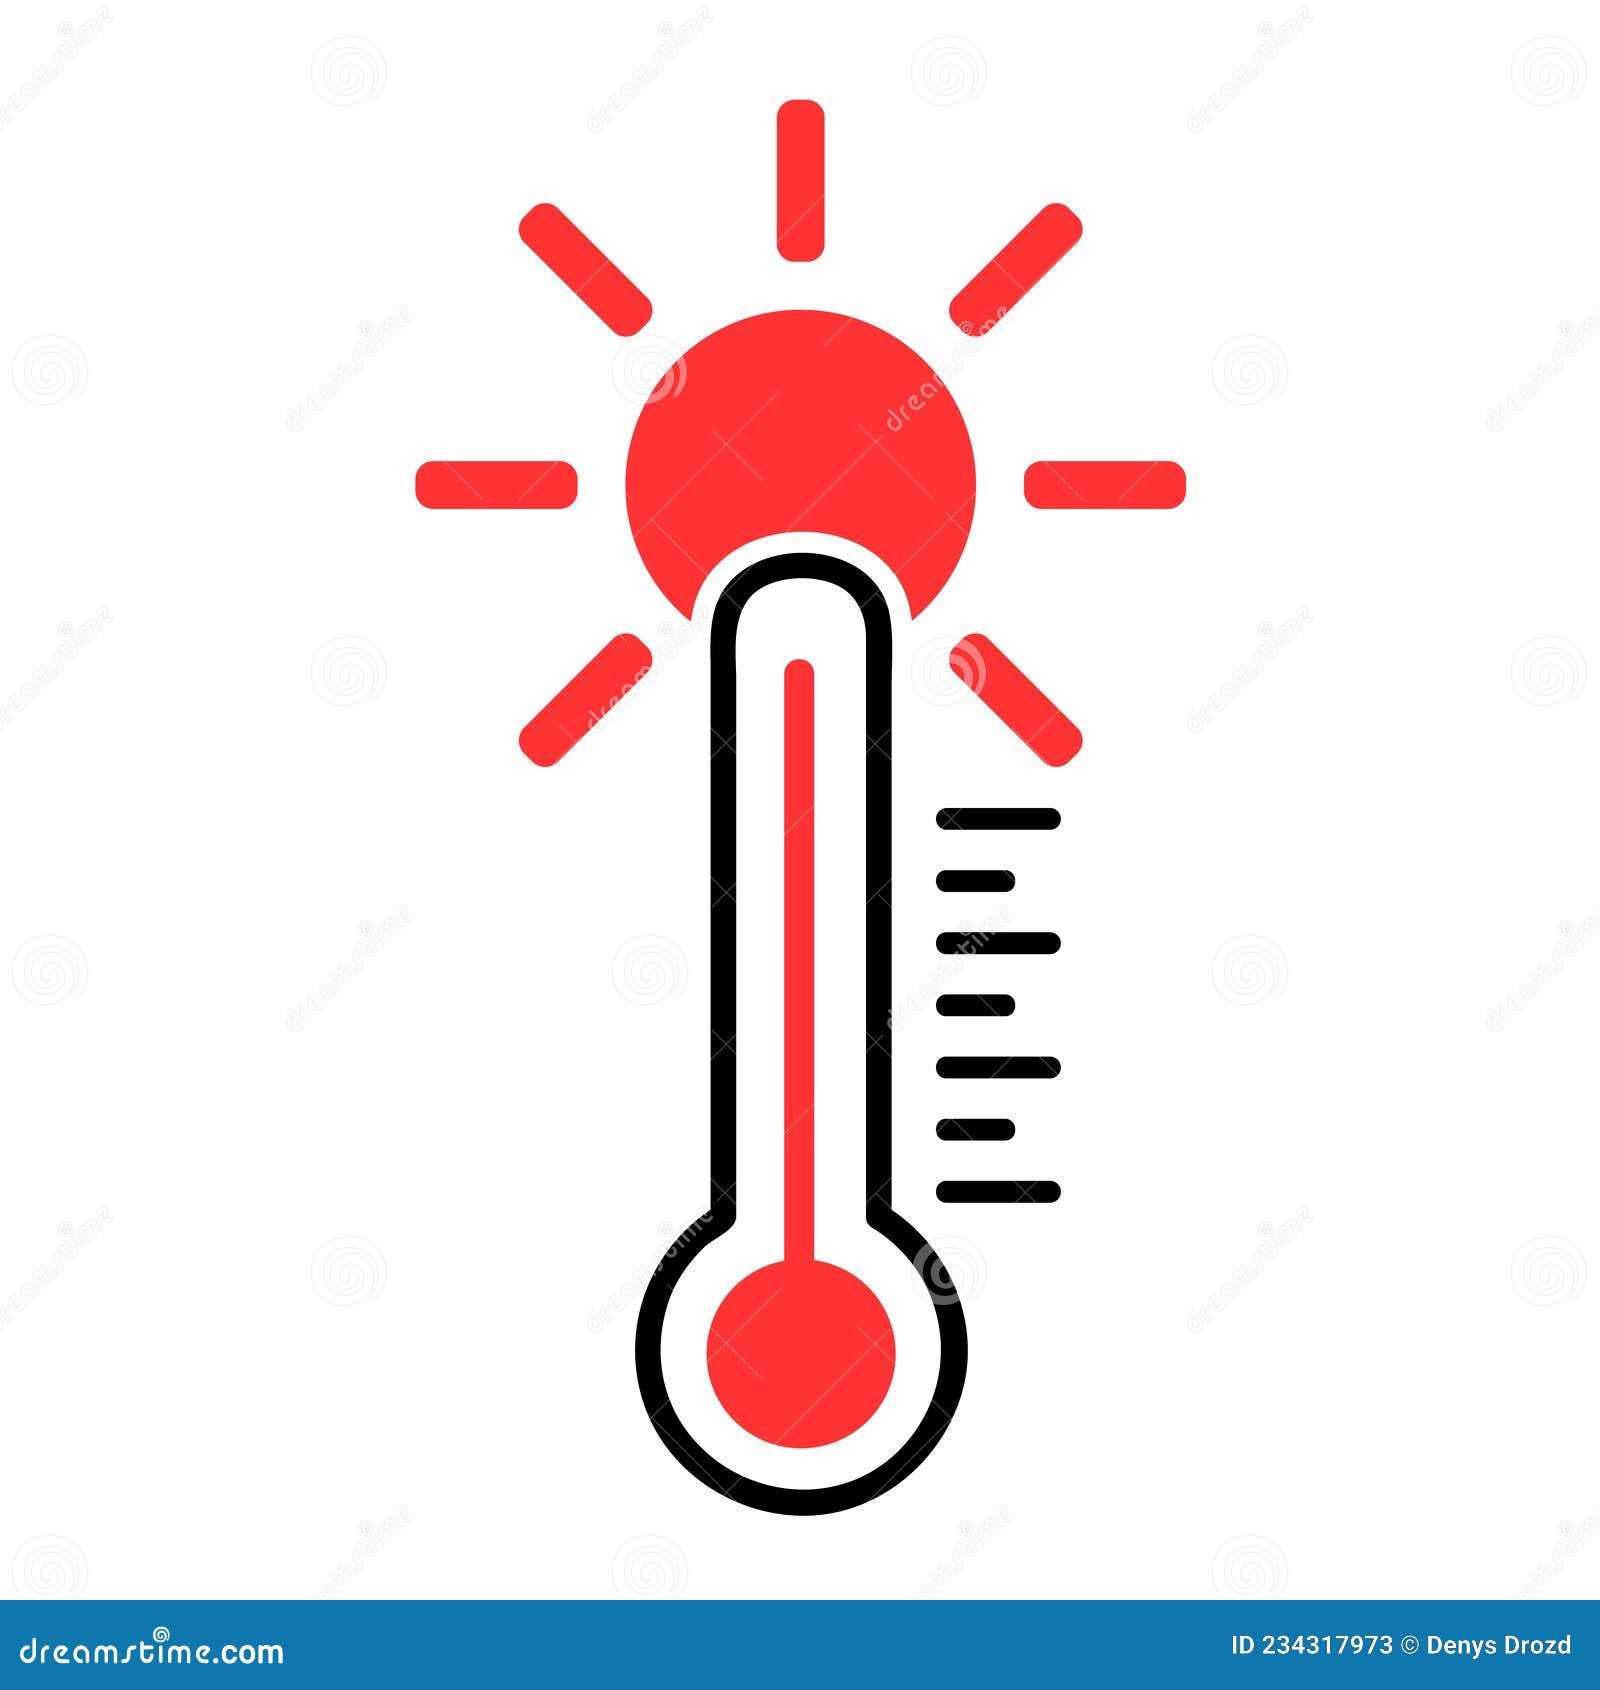 https://thumbs.dreamstime.com/z/hot-icon-vector-heat-illustration-sign-thermometer-symbol-temperature-logo-hot-icon-vector-heat-illustration-sign-thermometer-234317973.jpg